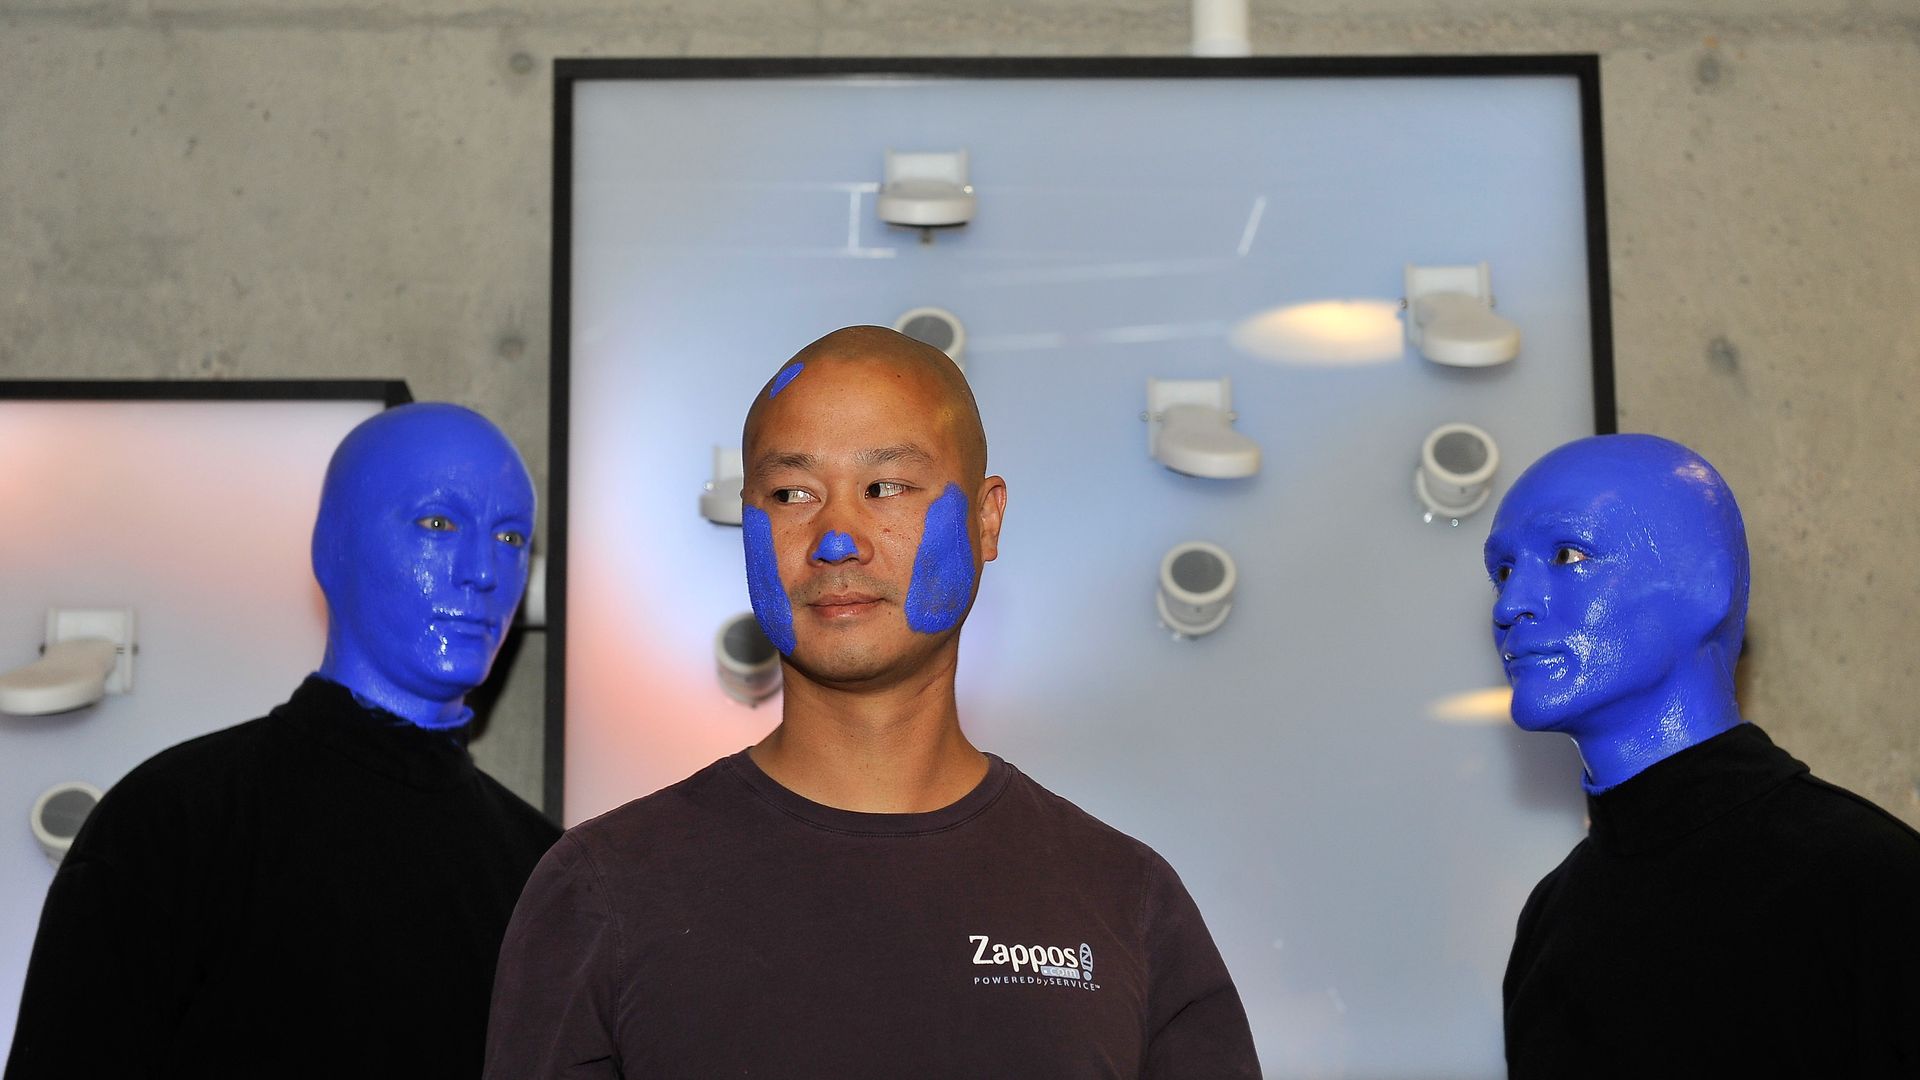 Tony Hsieh with Blue Men.